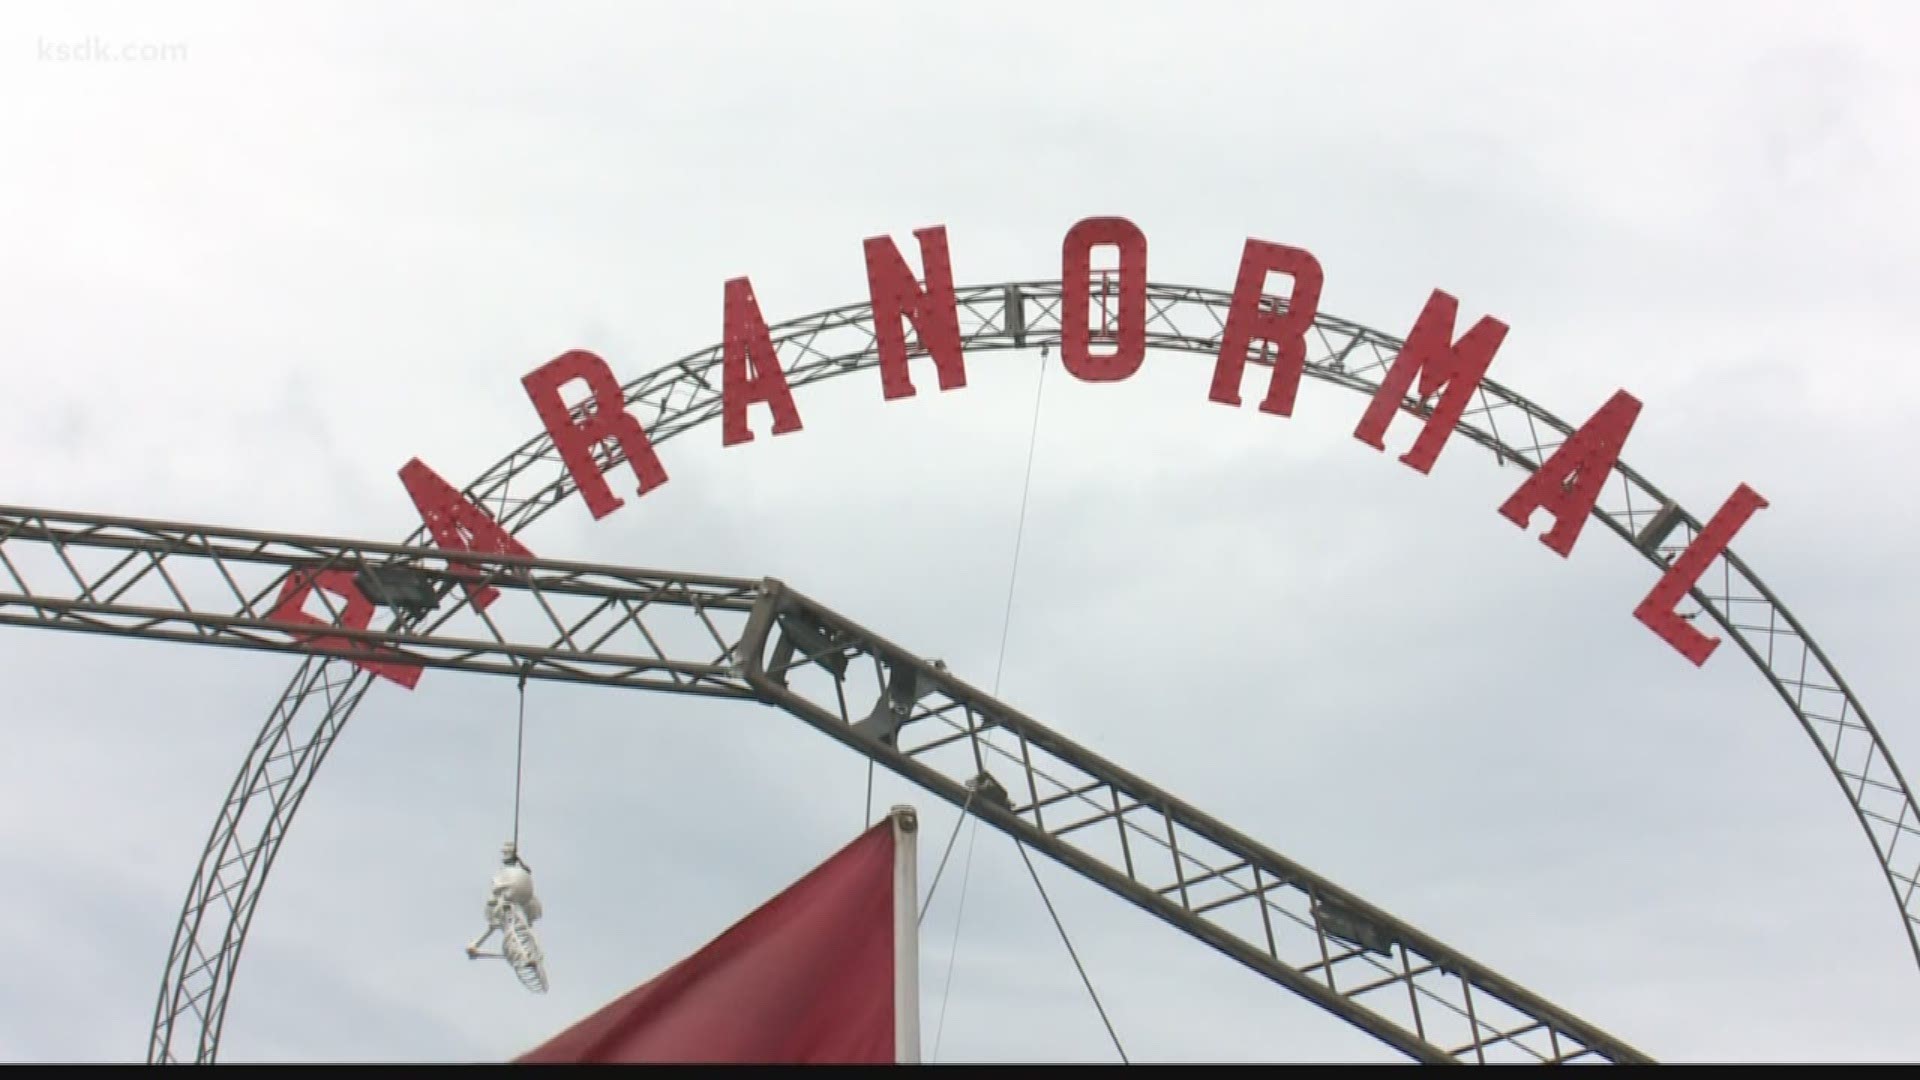 Paranormal Cirque debuts in St. Louis